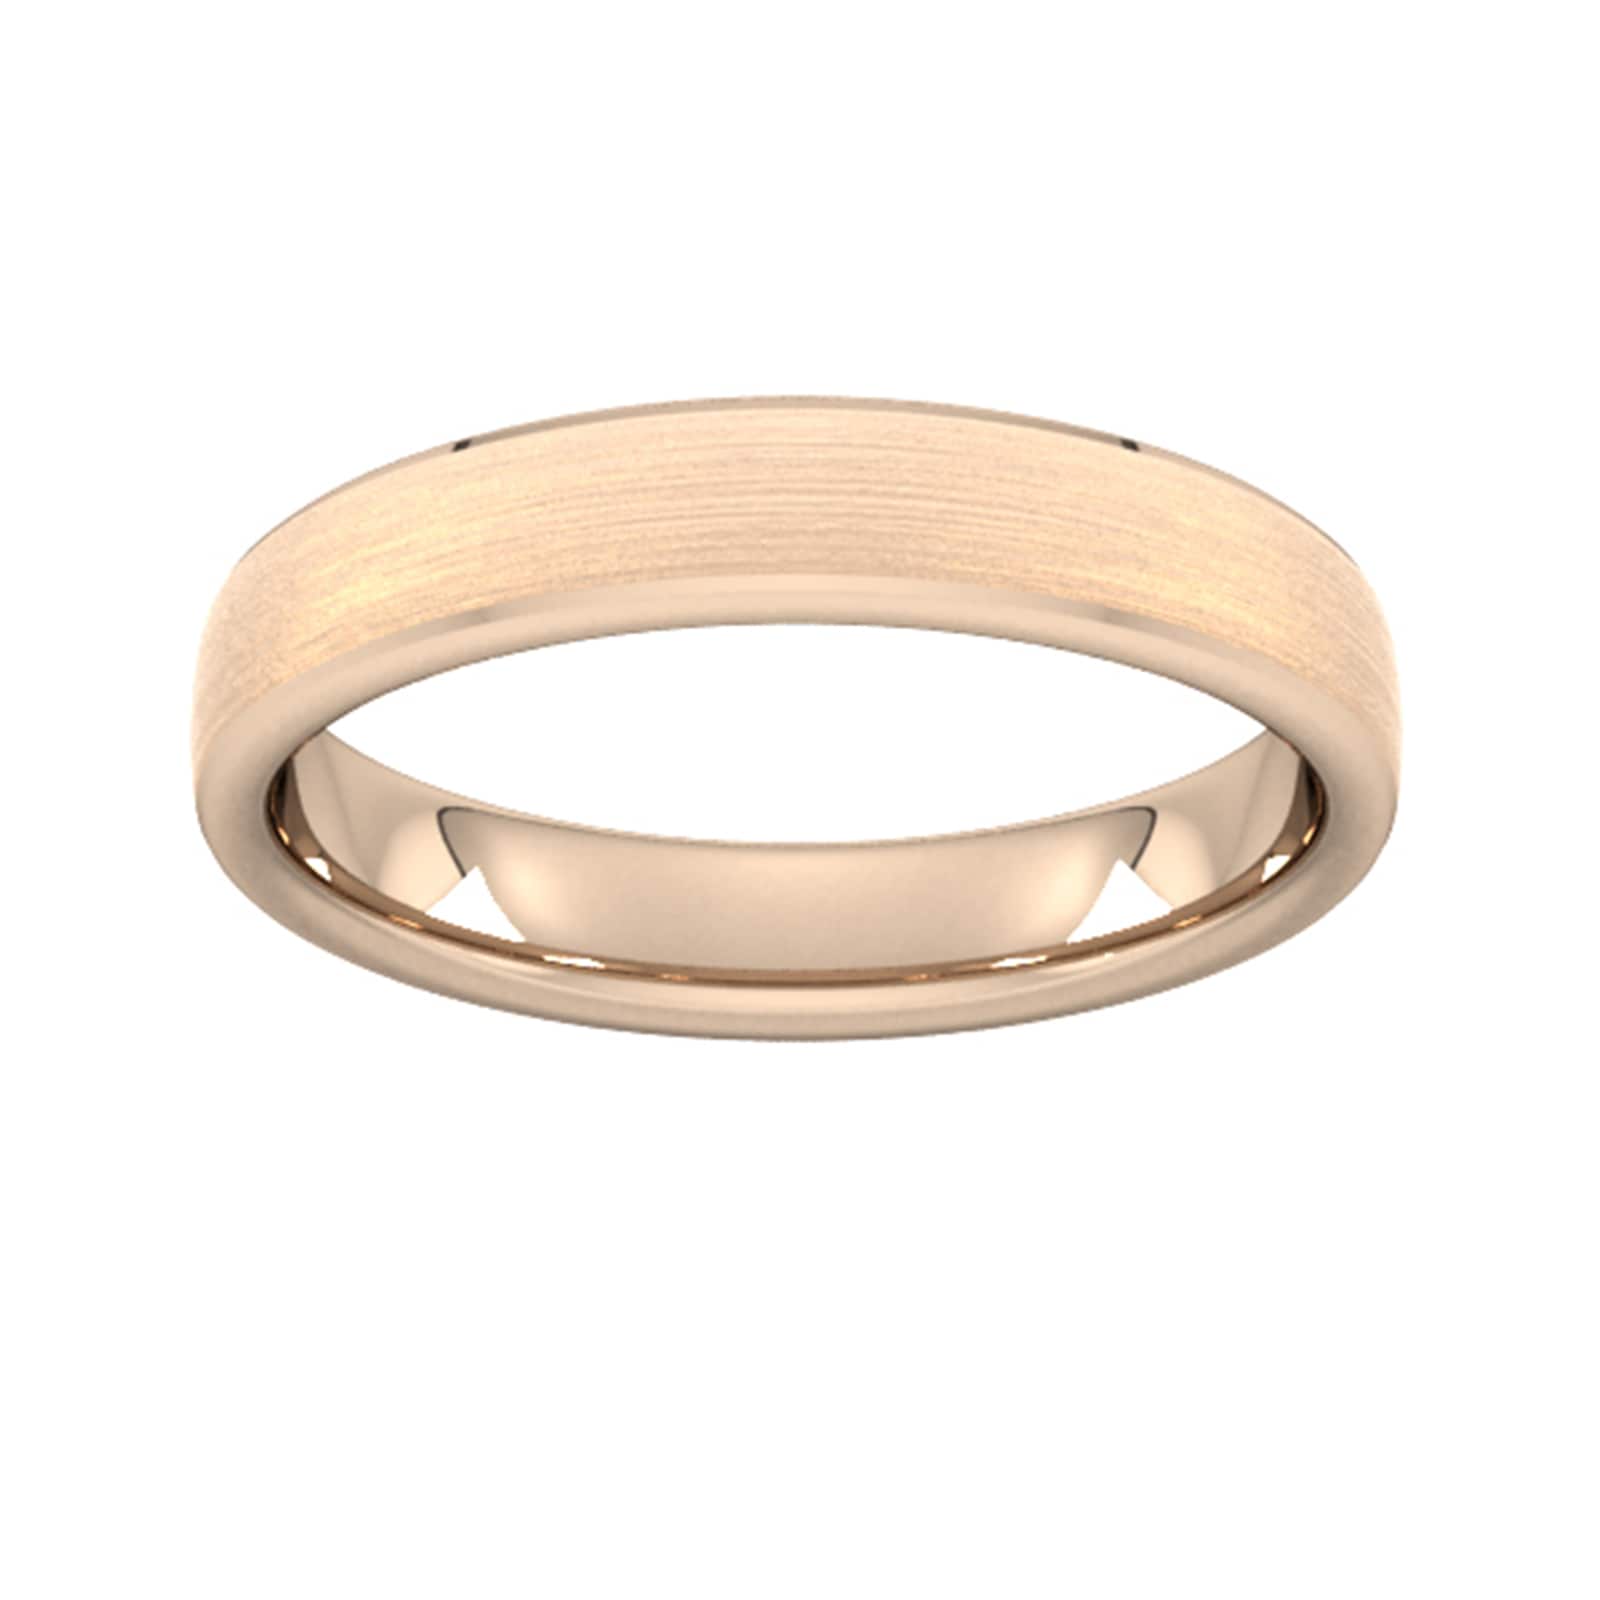 4mm Flat Court Heavy Polished Chamfered Edges With Matt Centre Wedding Ring In 18 Carat Rose Gold - Ring Size S